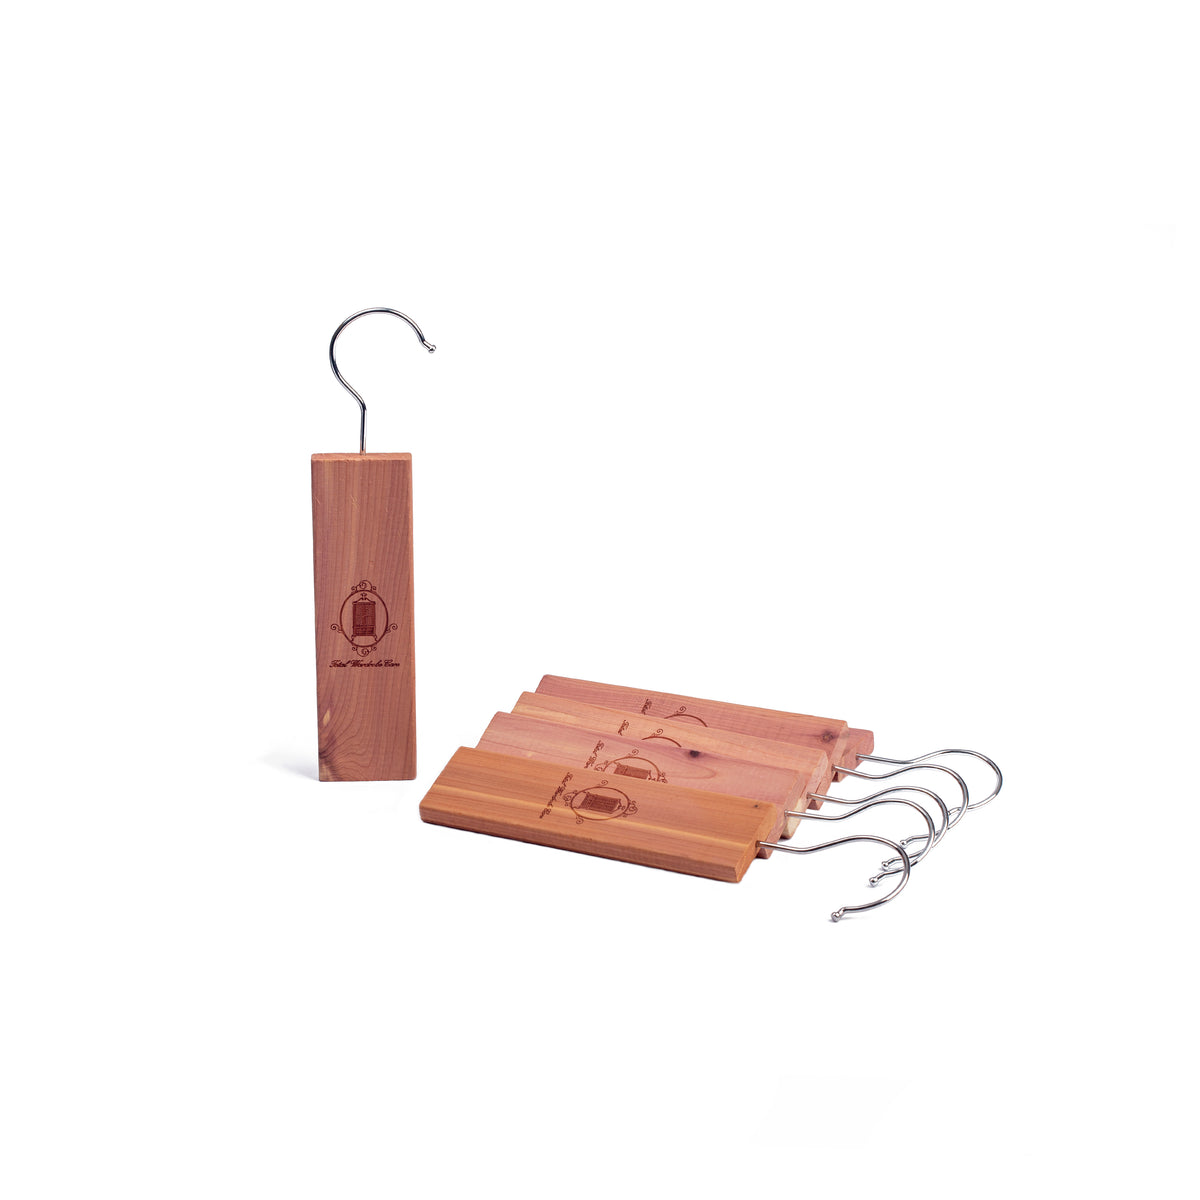 Singular cedarwood hanger standing beside a row of laying down hangers on white background